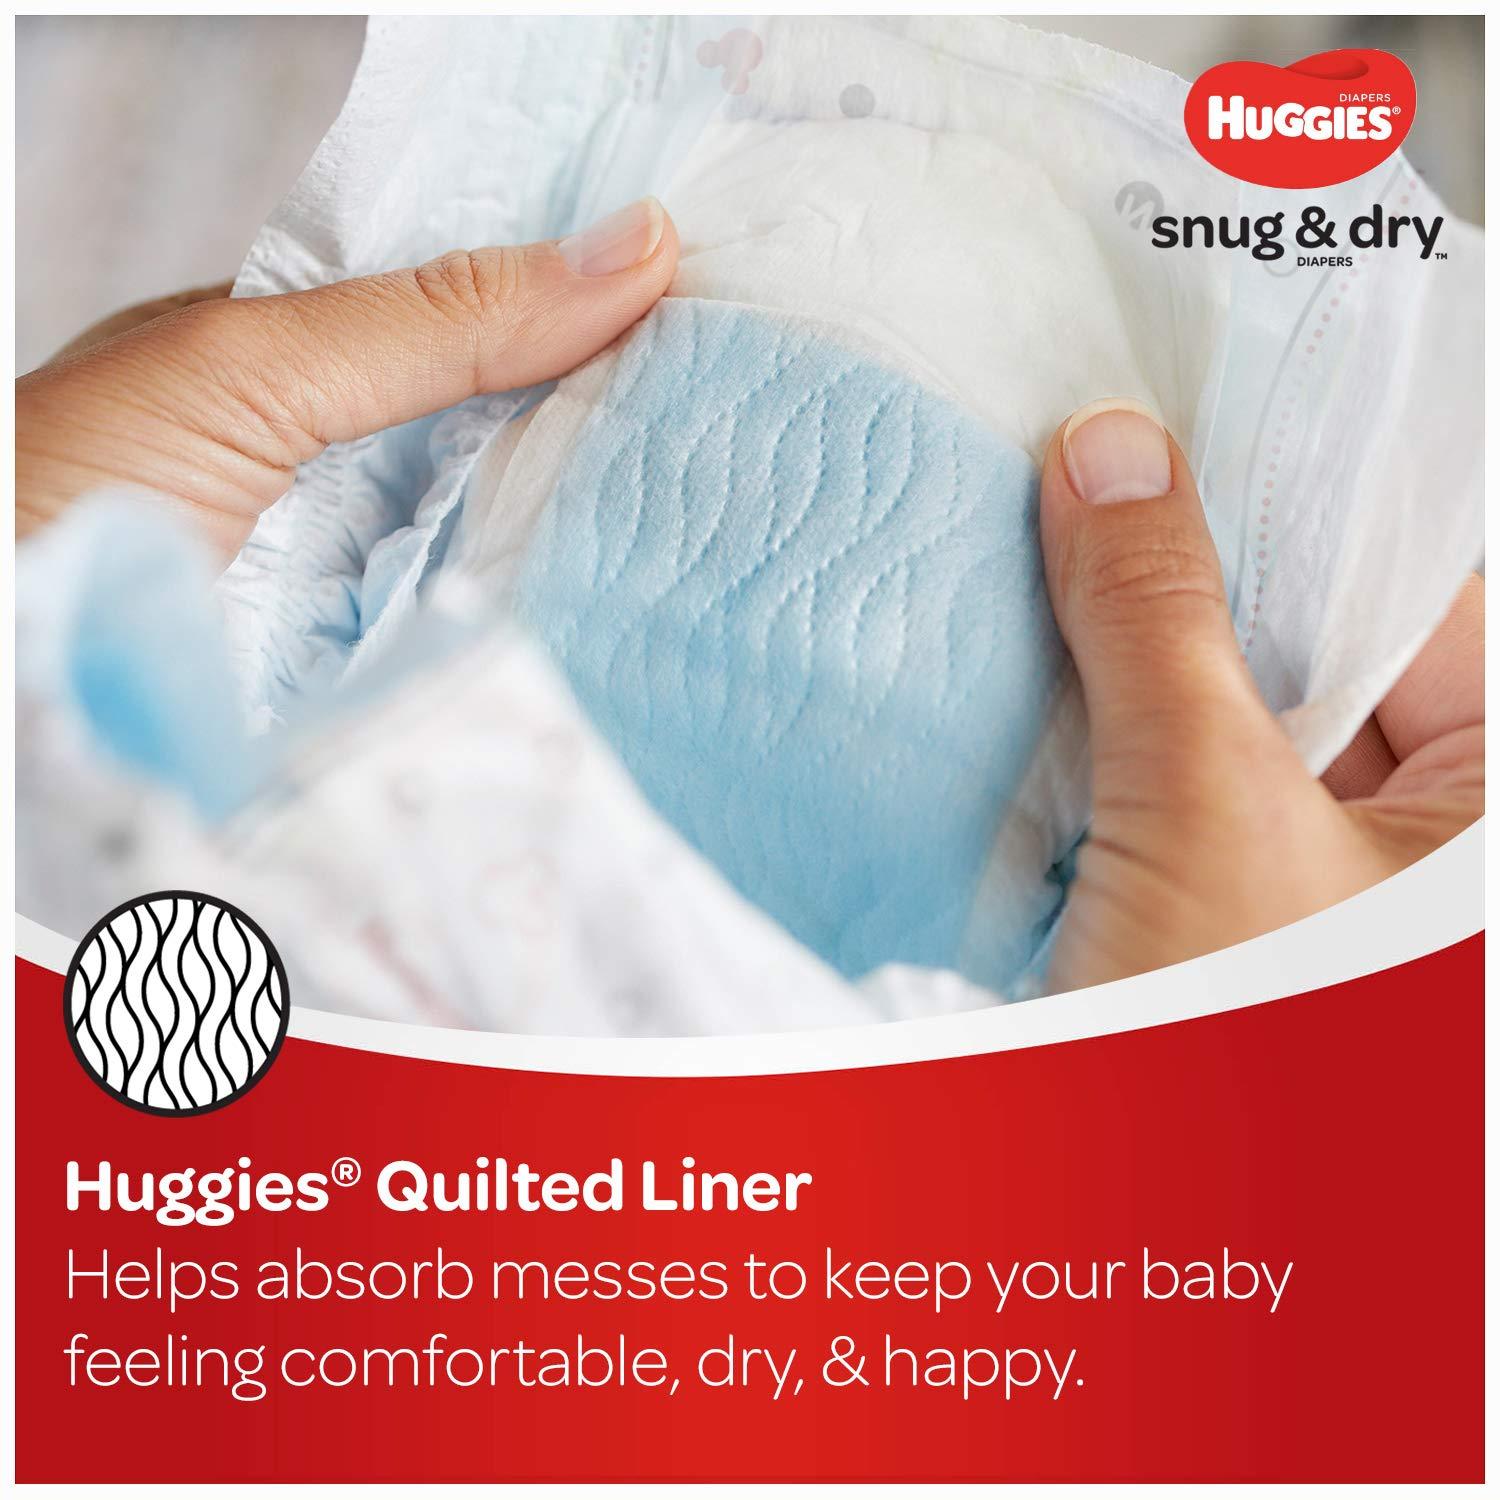 Huggies Snug & Dry Diapers, Size 3, 80 Count